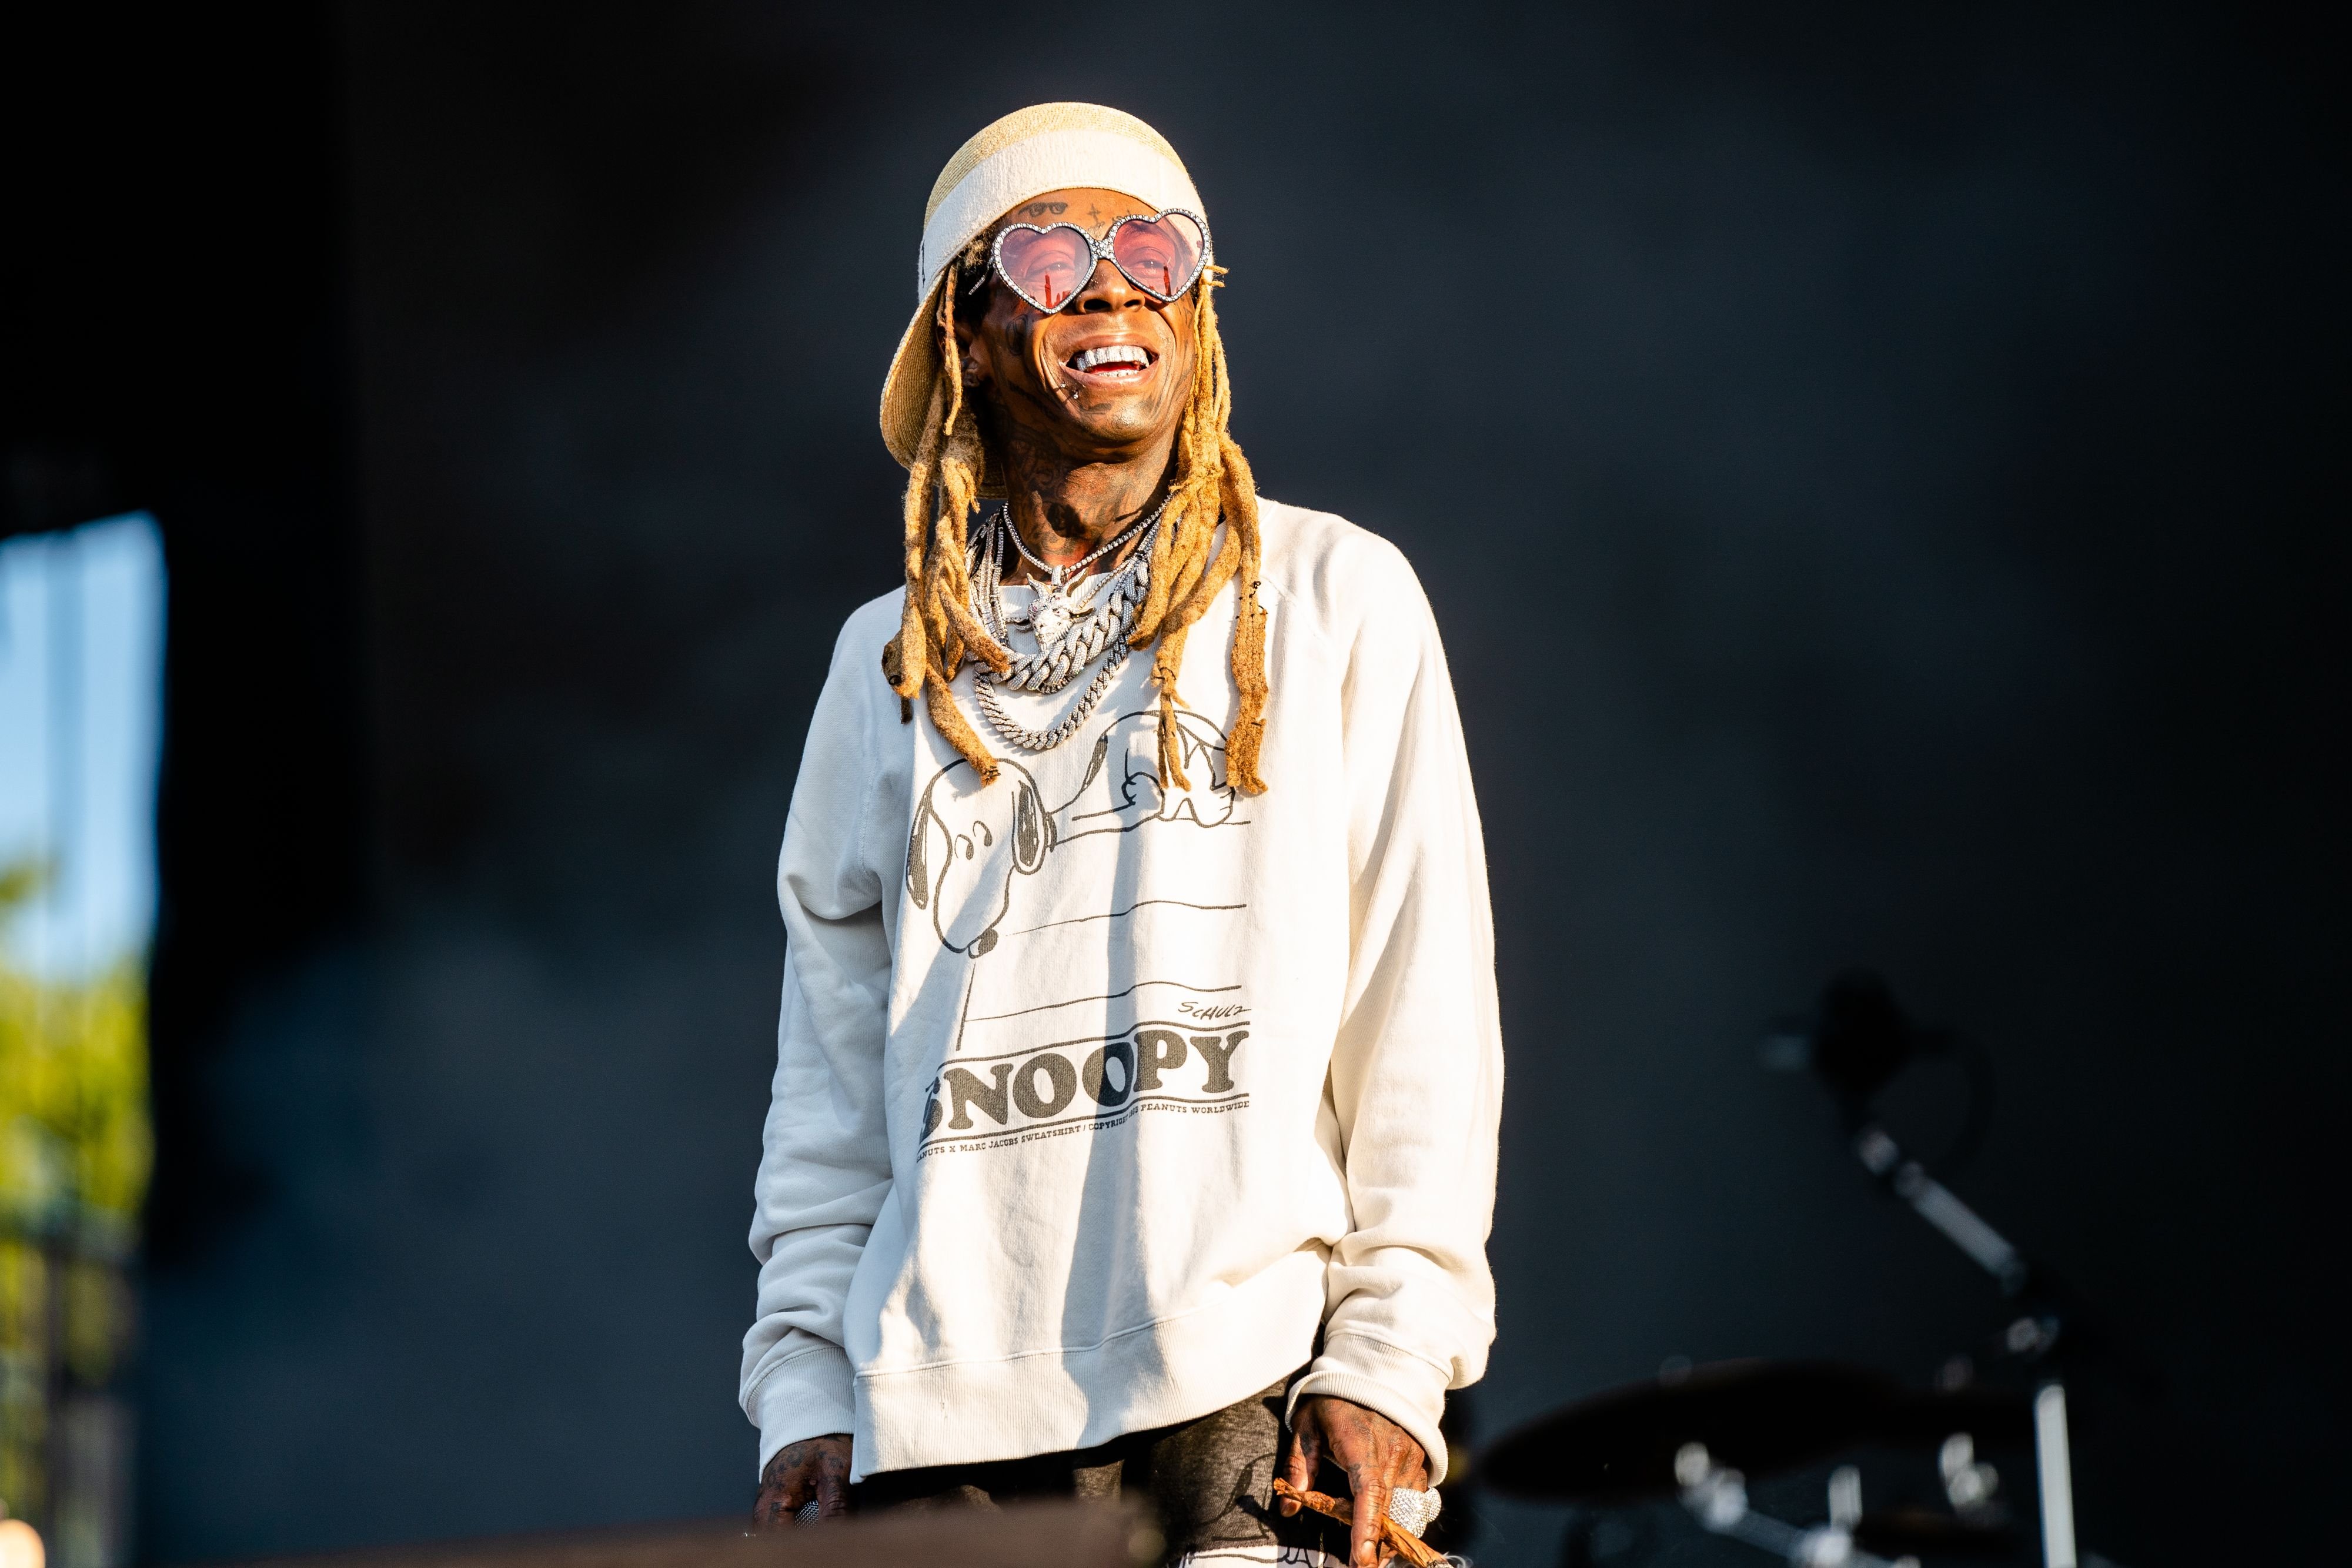 Lil Wayne performs at the Lollapalooza Music Festival at Grant Park on August 03, 2019 | Photo: Getty Images